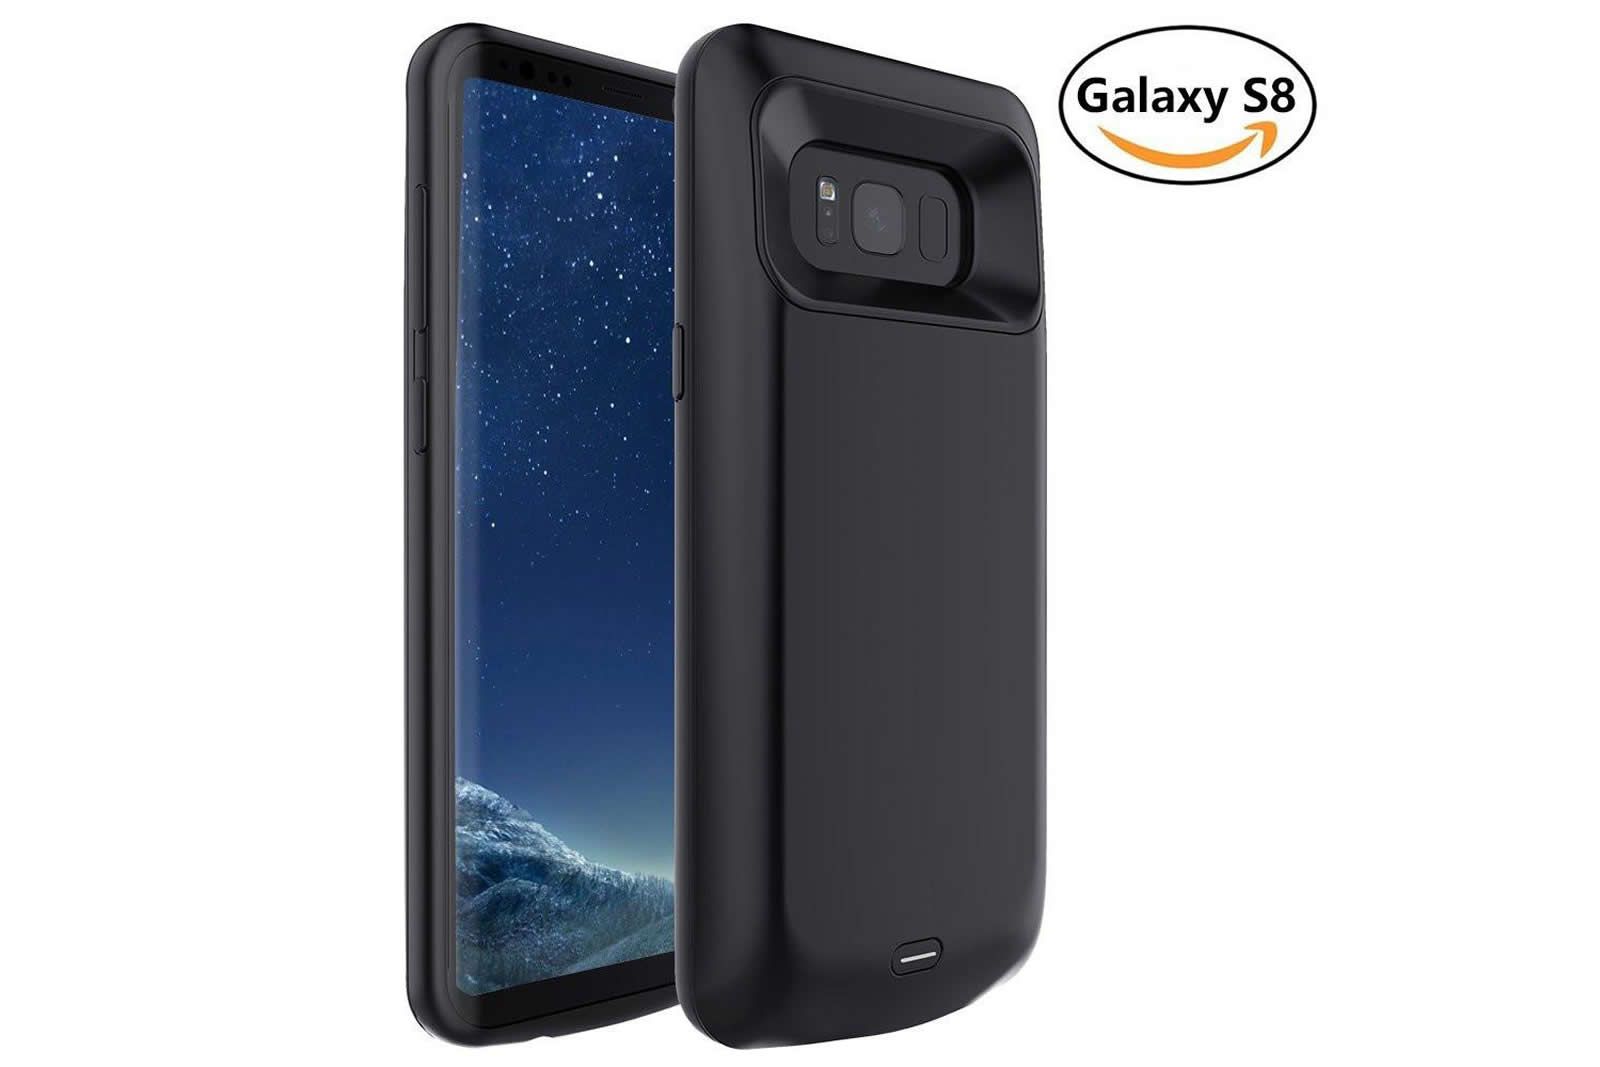 Samsung Galaxy S8 battery case image 1